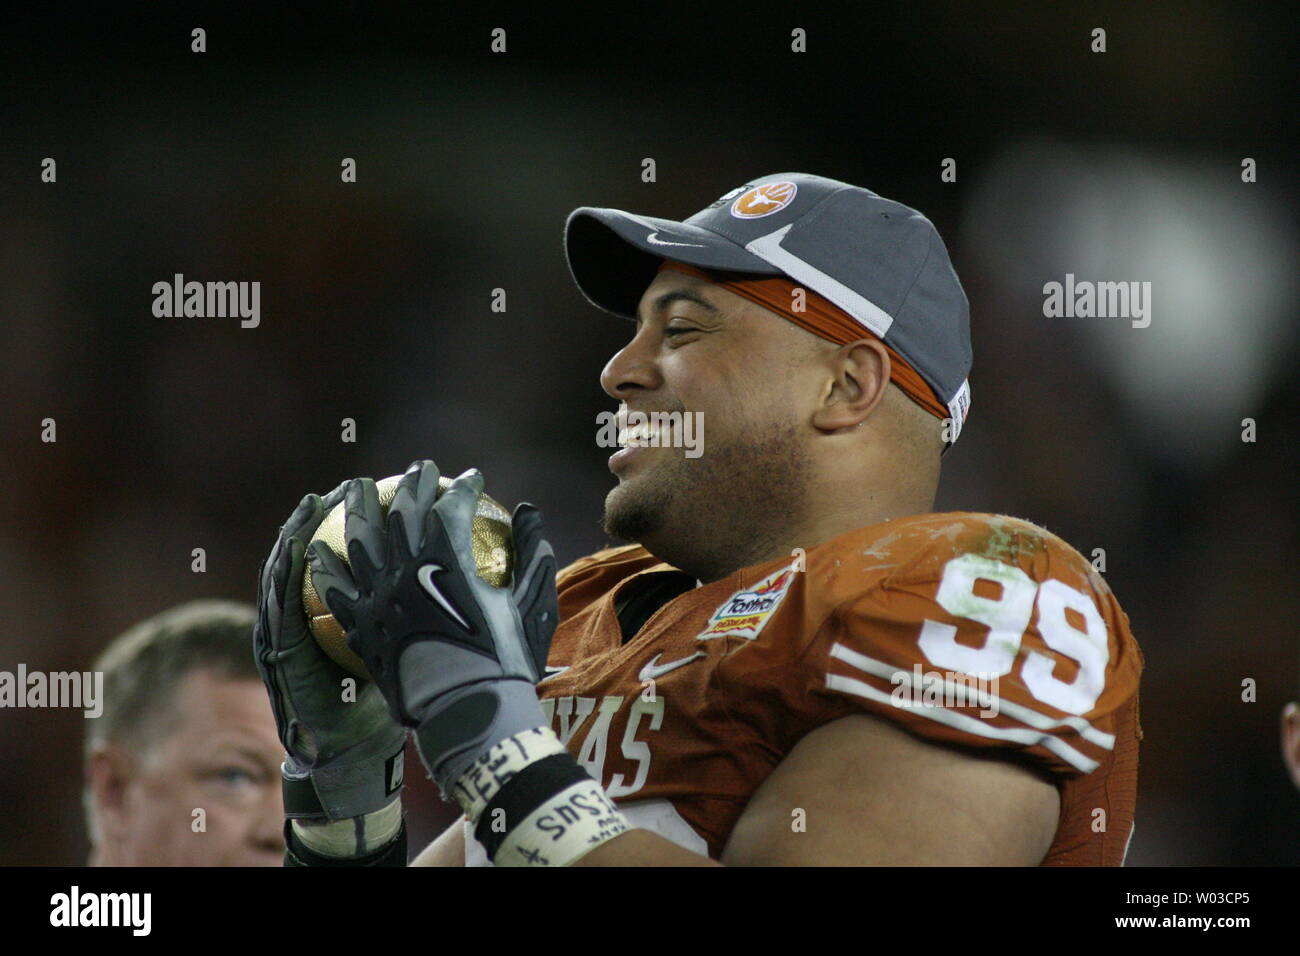 Texas defensive tackle Roy Miller holds the Fiesta Bowl Trophy after Texas defeated Ohio State 24-21 in the Fiesta Bowl at University of Phoenix Stadium in Glendale, Arizona, January 5, 2009. (UPI Photo/Art Foxall) Stock Photo